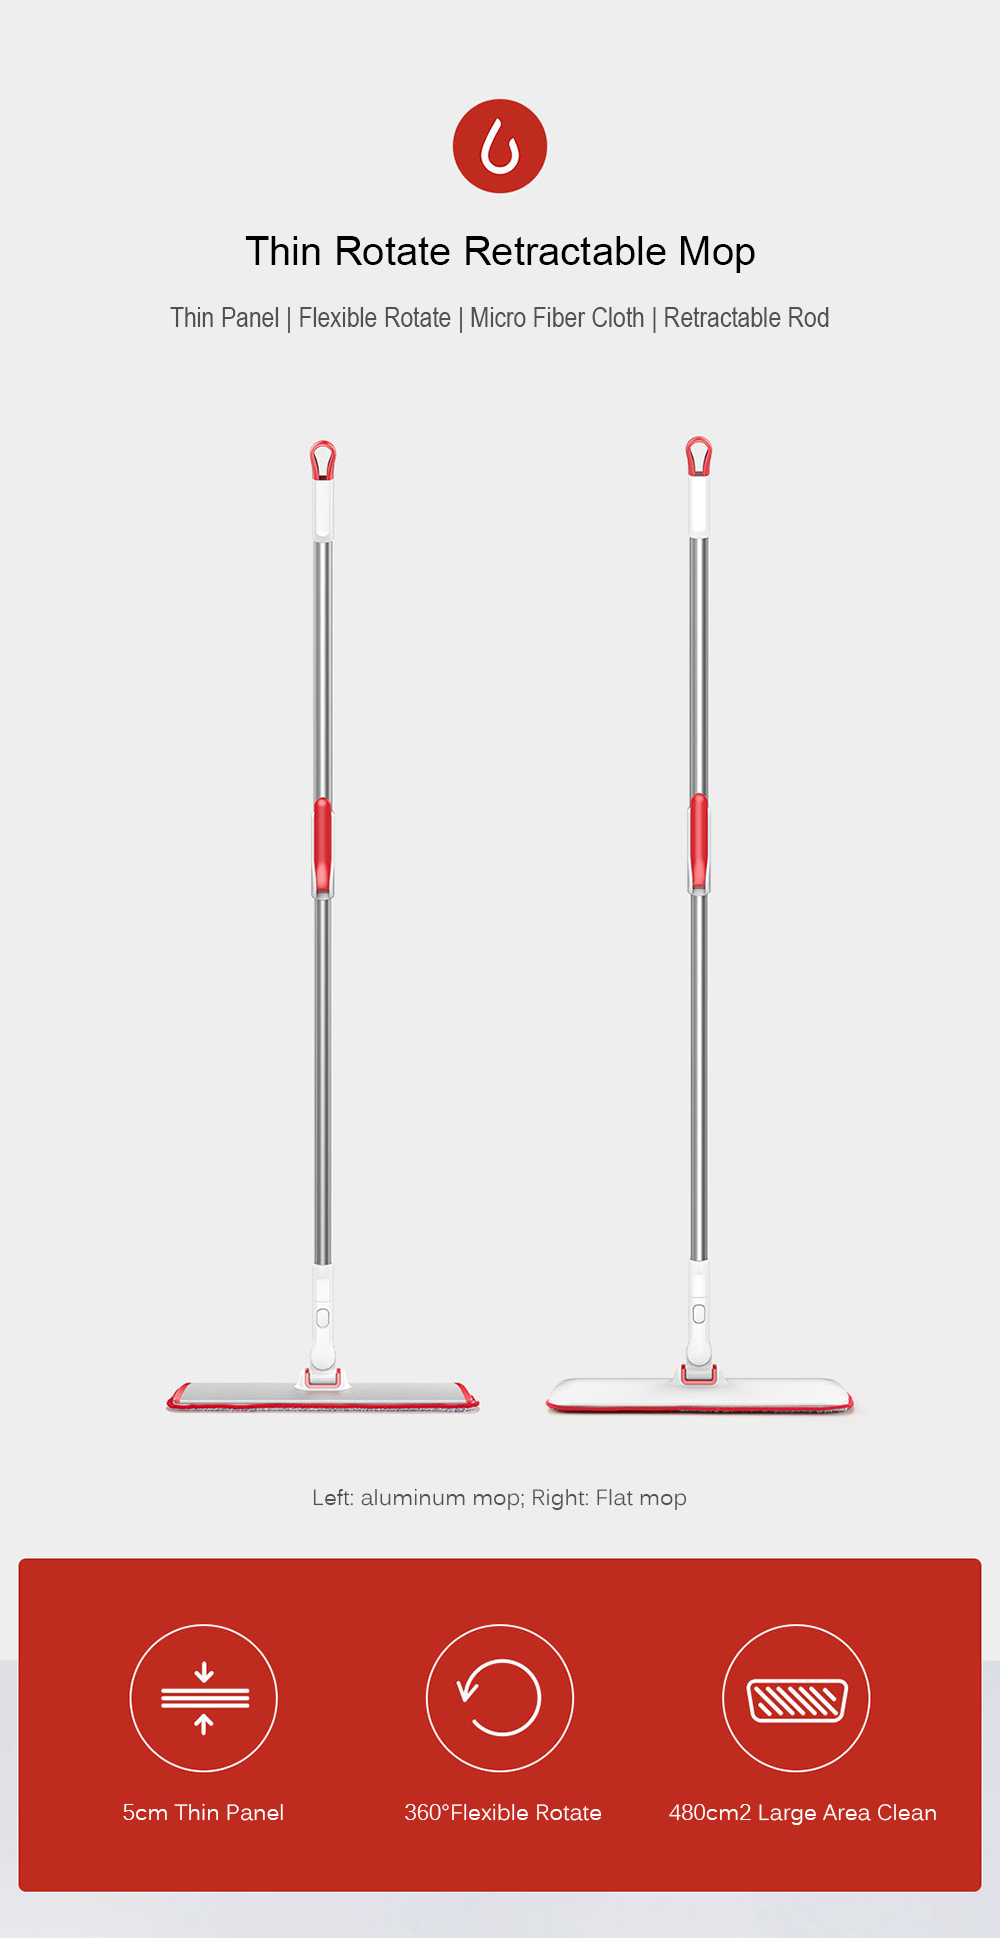 Slim Rotatable Retractable Mop from Xiaomi youpin